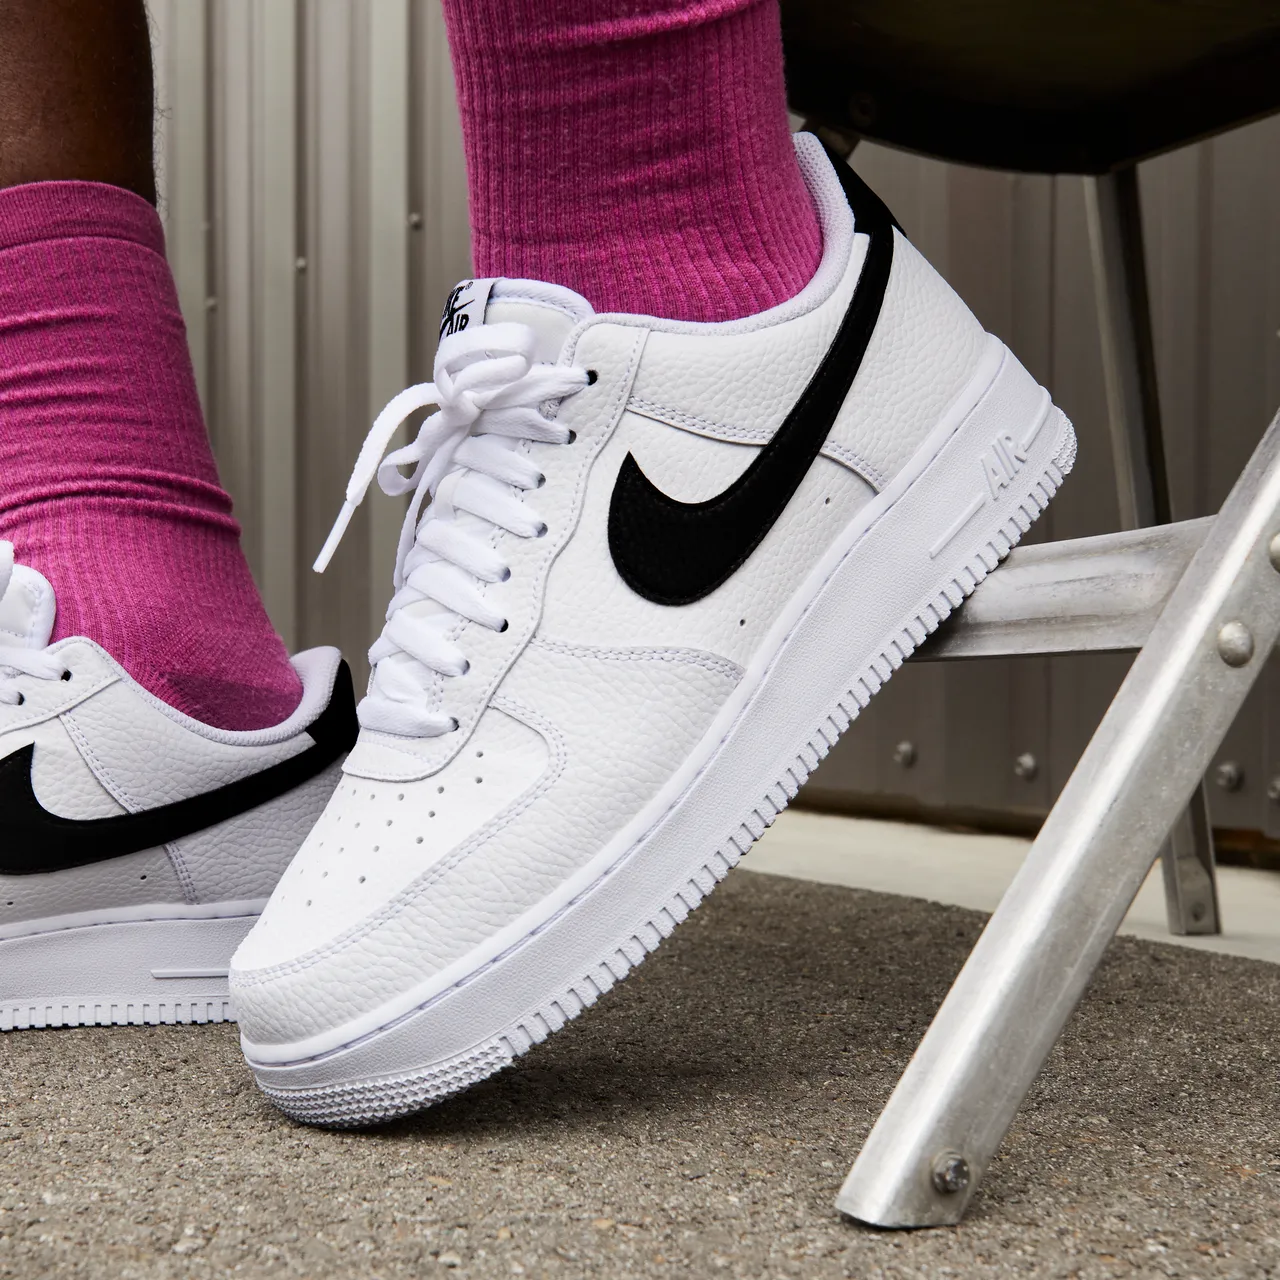 Nike Air Force 1 '07 Men's Shoe - White - Leather